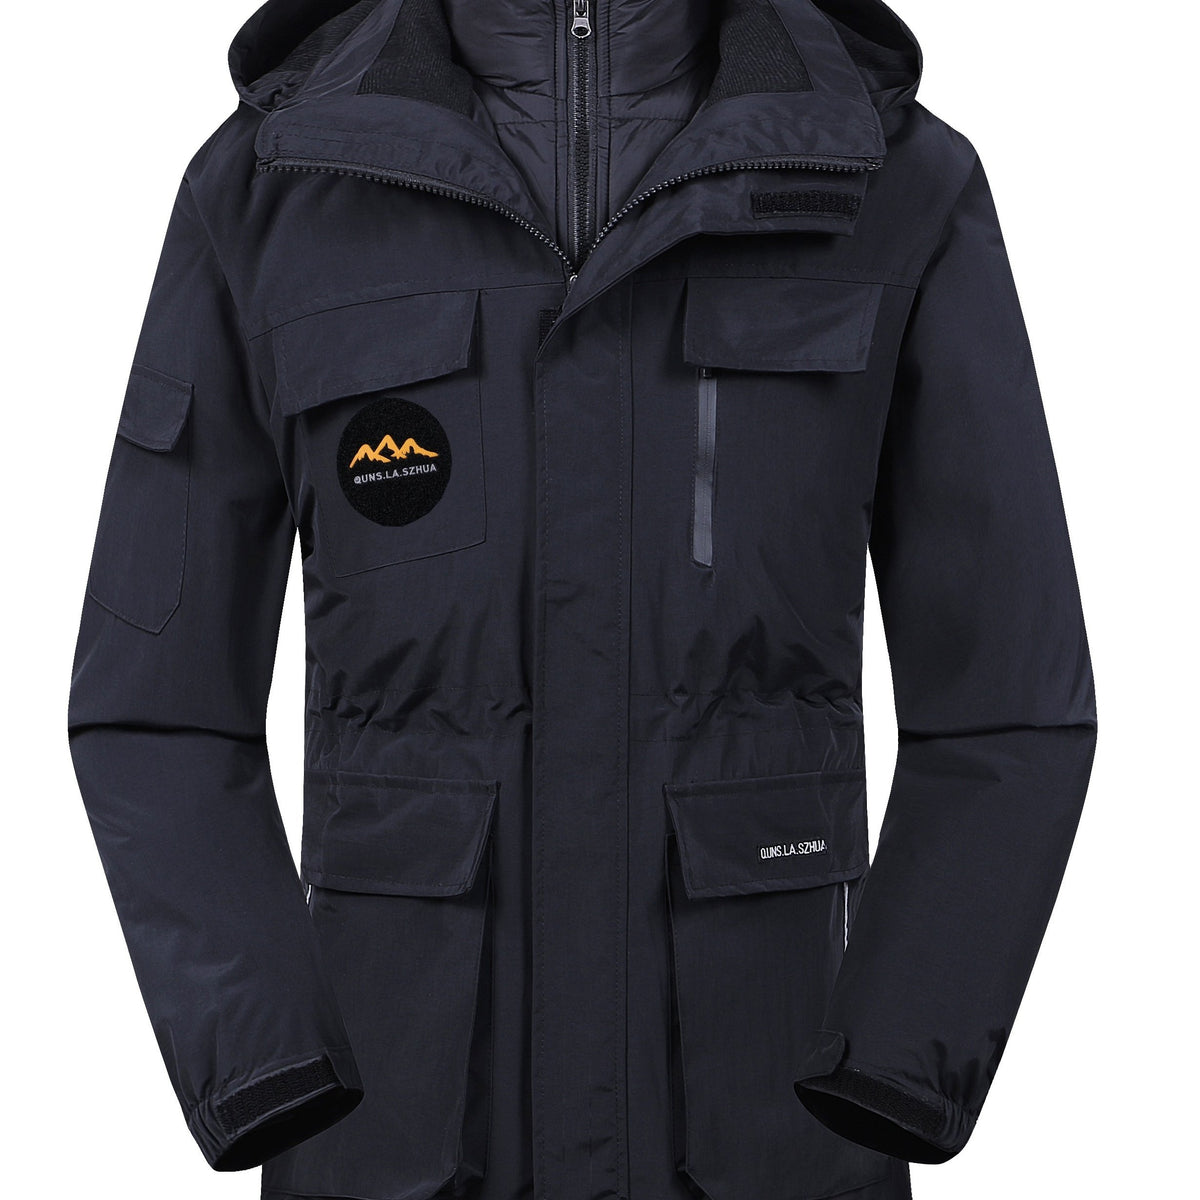 Waterproof Plus Size Hooded Ski Jacket with Detachable Down Liner and Thermal Insulation